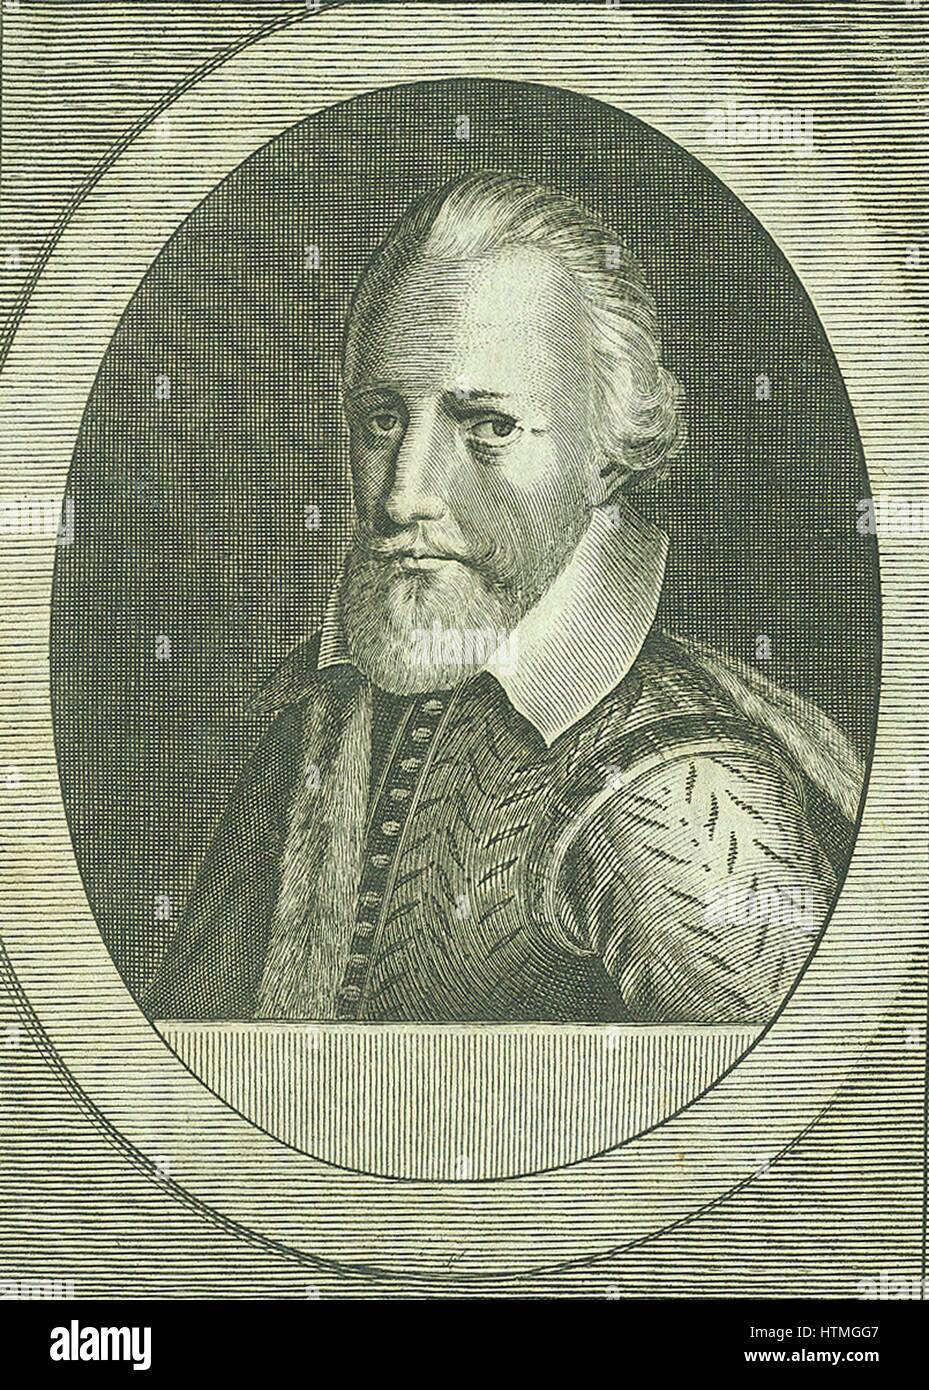 Richard Grenville (1541?-1591) English naval commander and hero. Tennyson celebrated his bravery at Flores in 1591 in his poem 'The Revenge: A Ballad of the Fleet'. Engraving by Michiel van der Gucht (1660-1725) for Clarendon's 'History'. Stock Photo